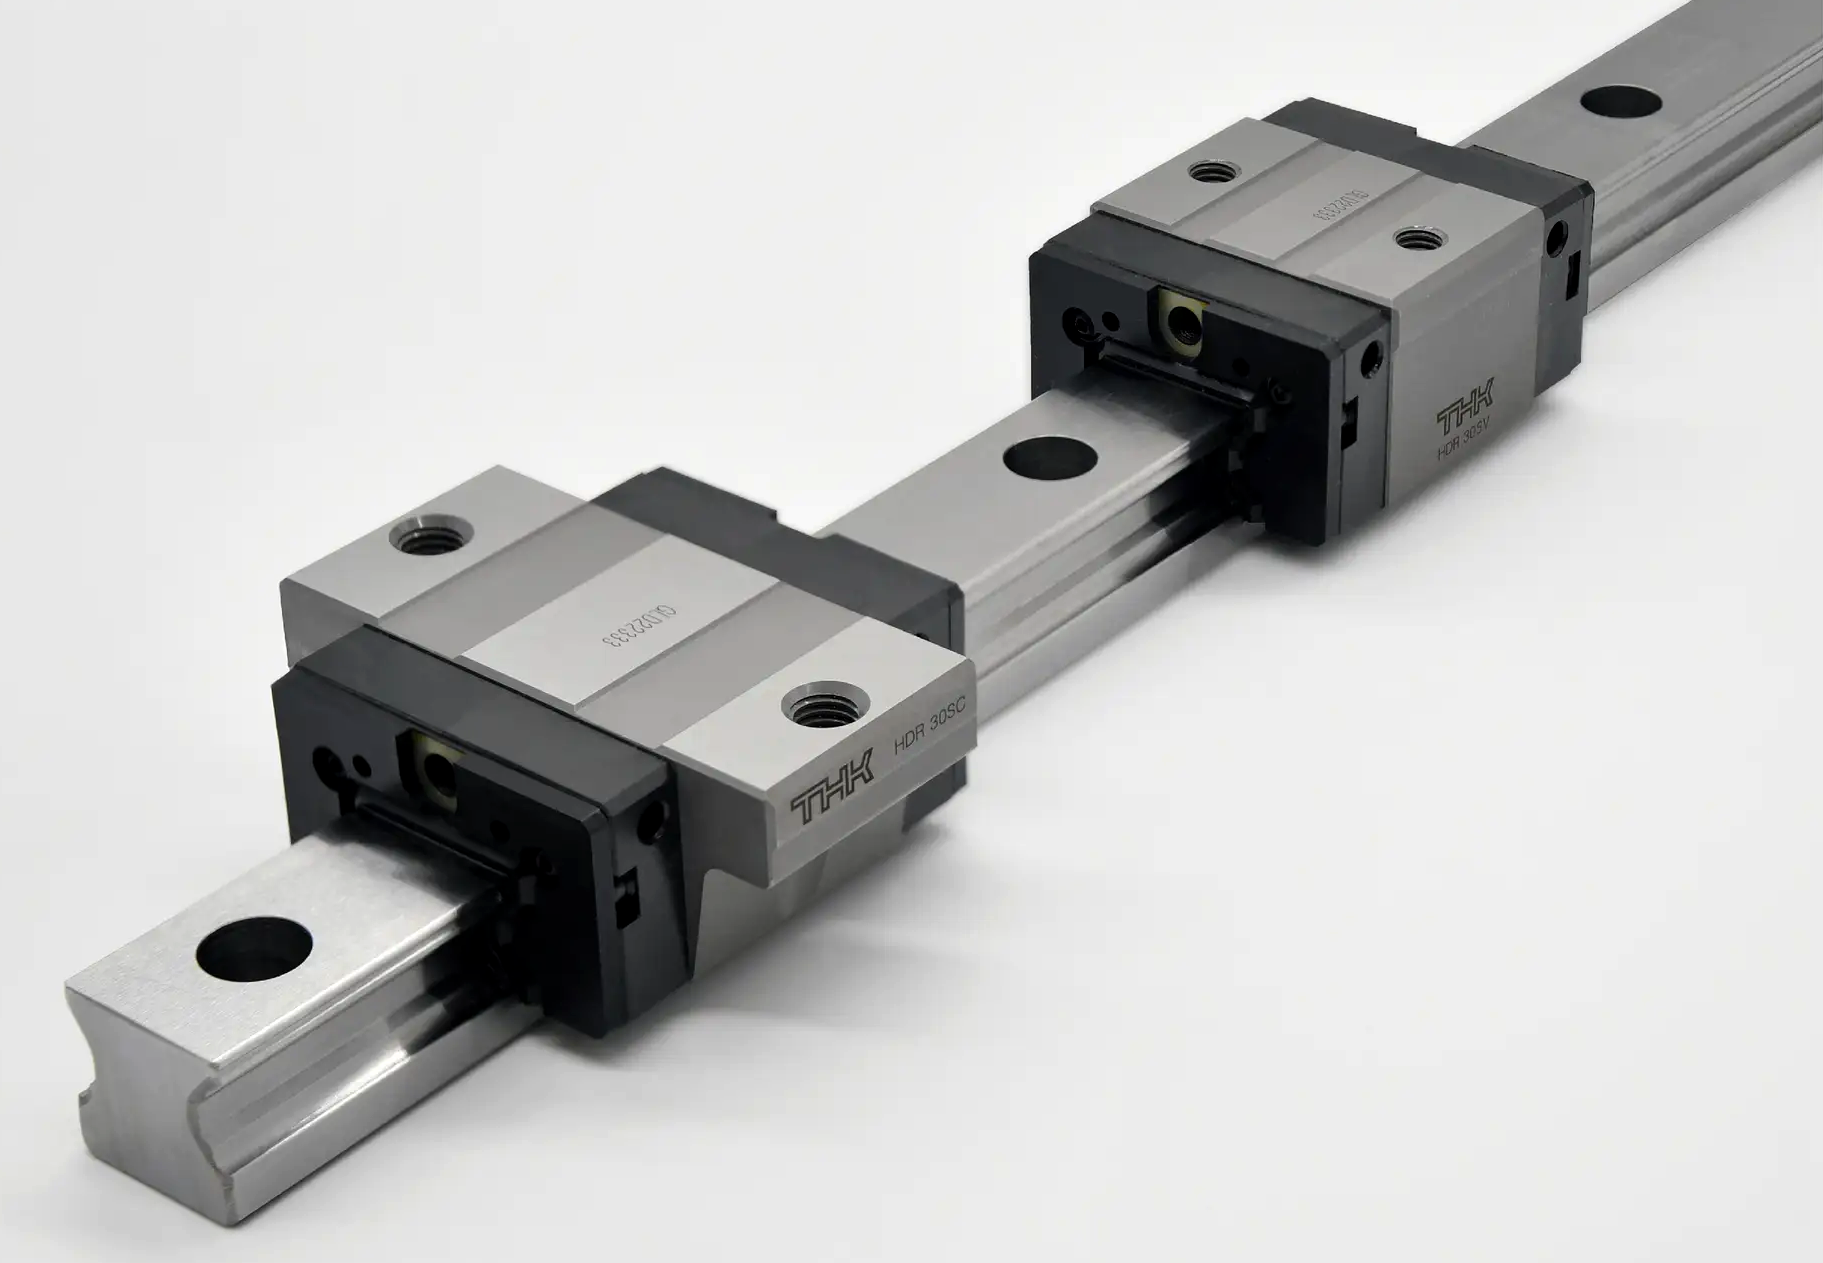 LM Guide / Linear Guide HDR with short blocks optimally suited for single rail systems